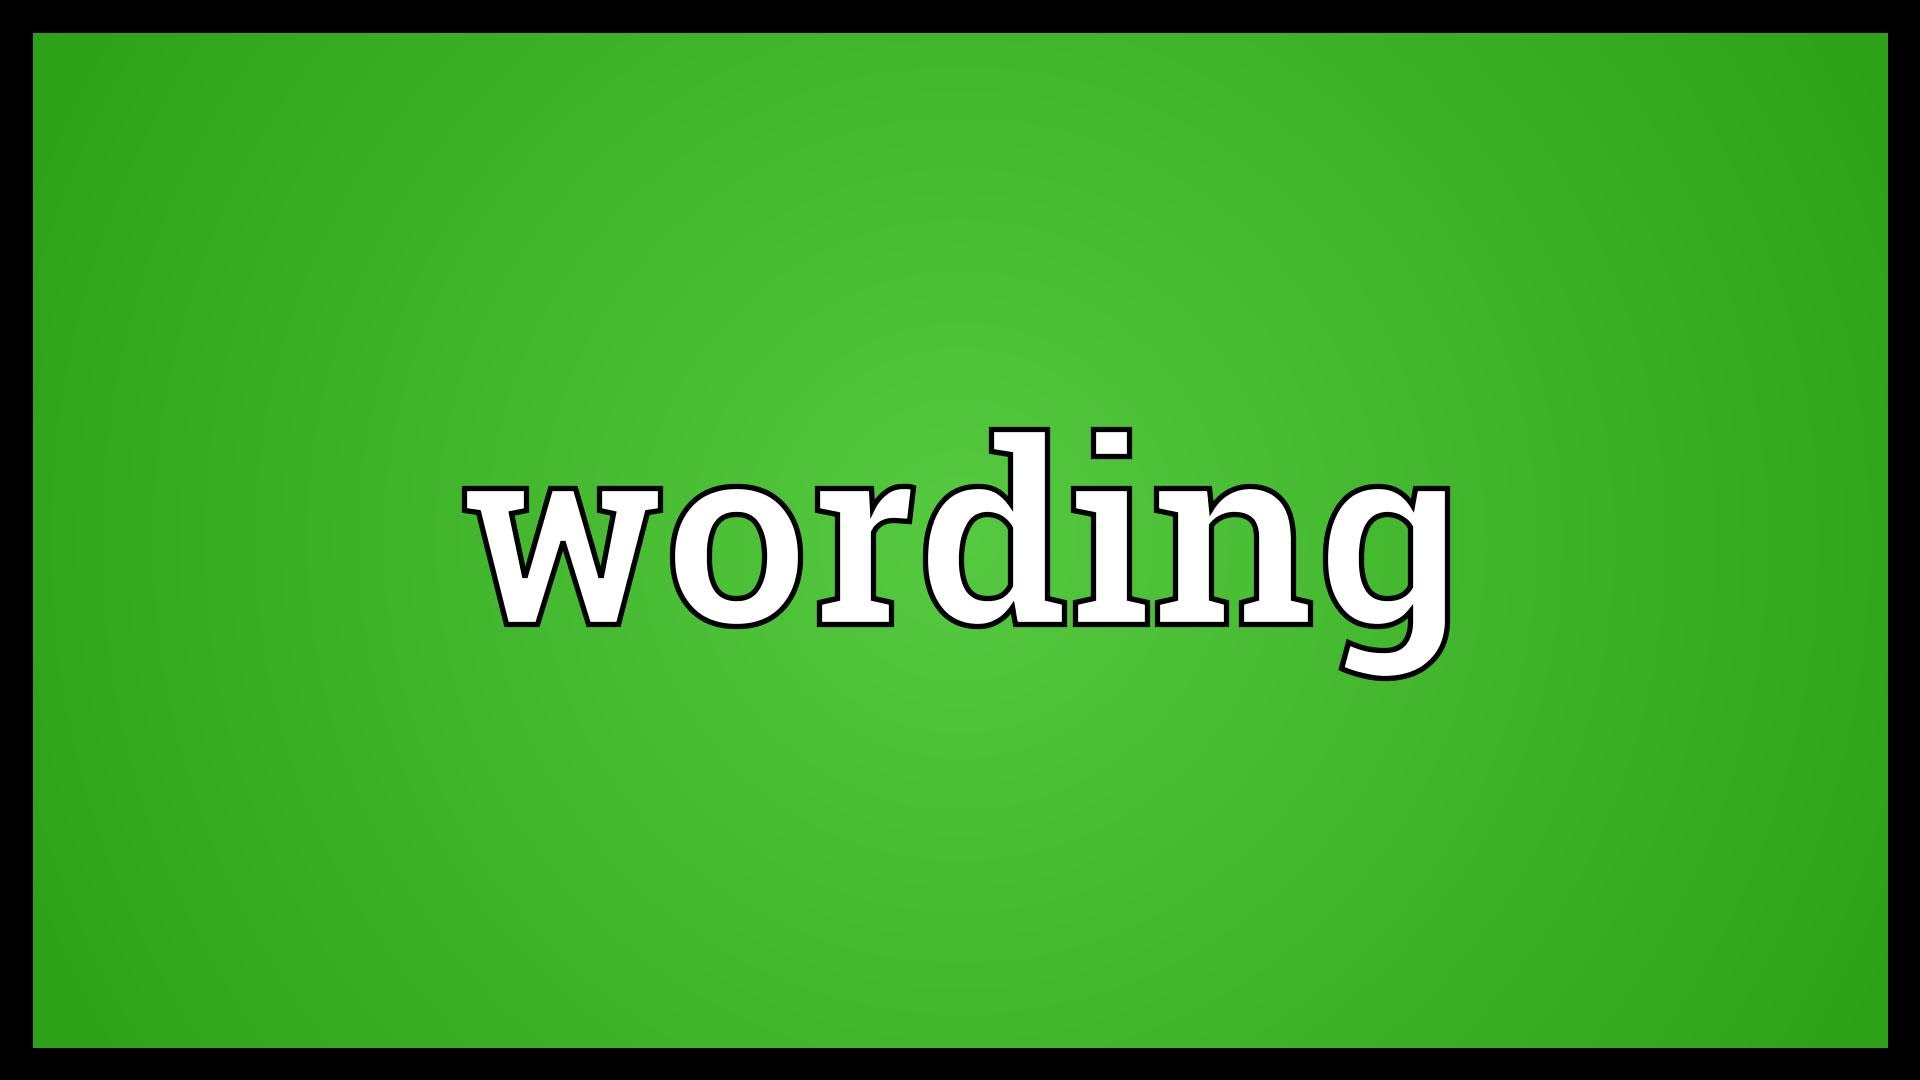 Wording Meaning and Definition